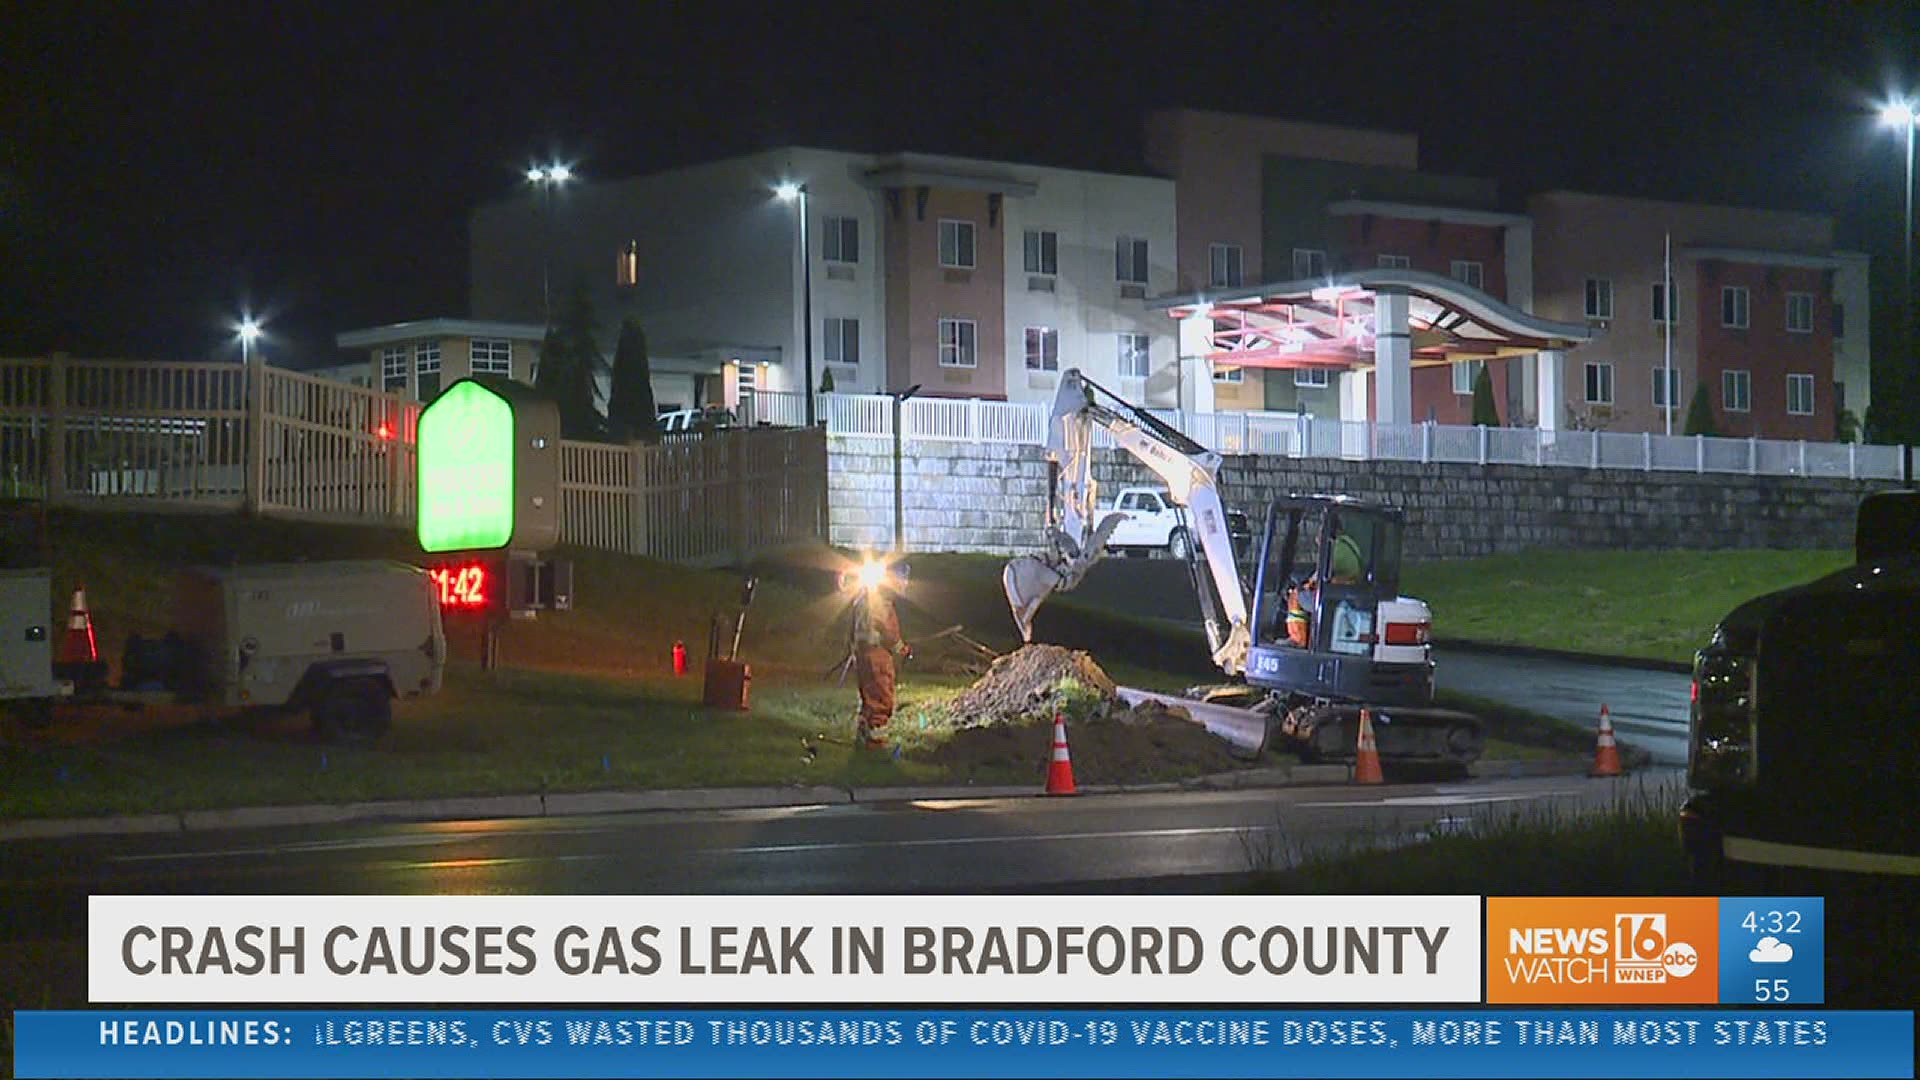 People were told to stay inside their homes during a gas leak caused by a crash in Bradford County.